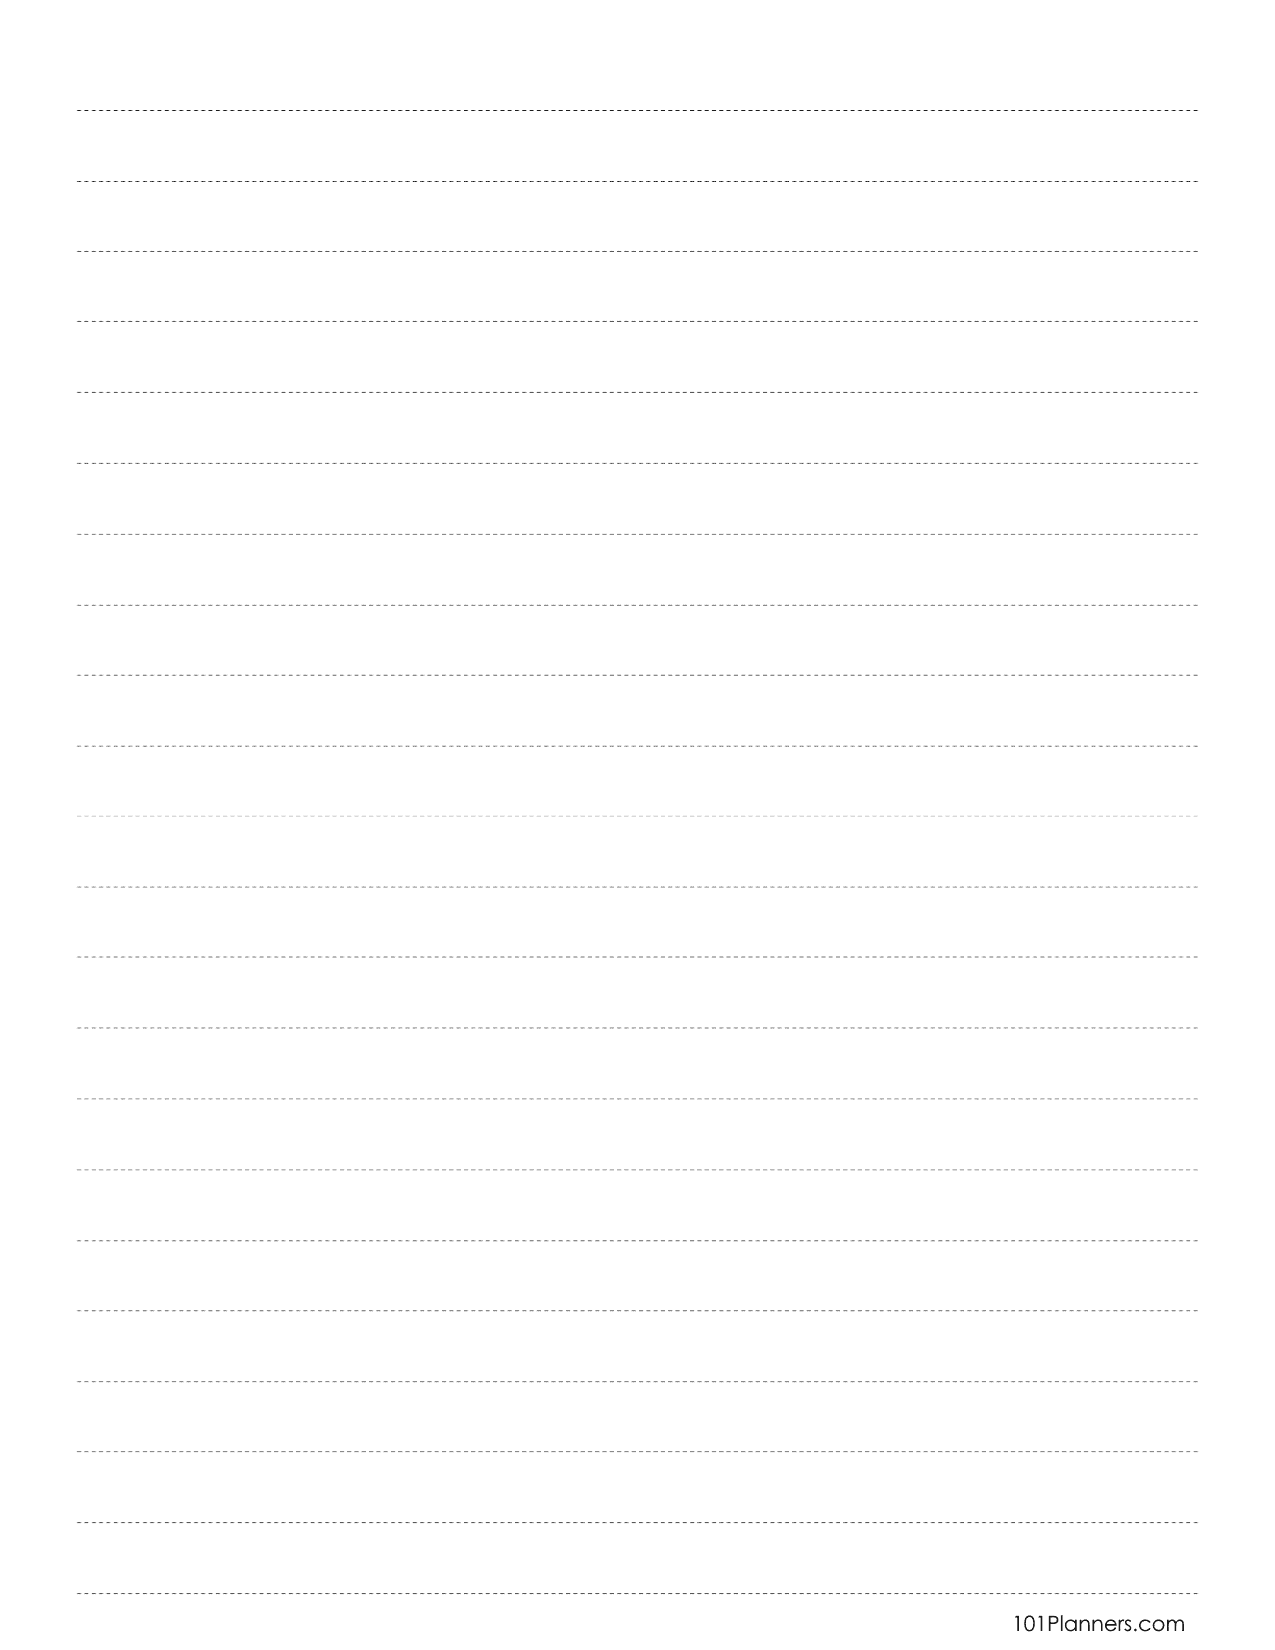 Lined Paper Templates - Download Printable PDF